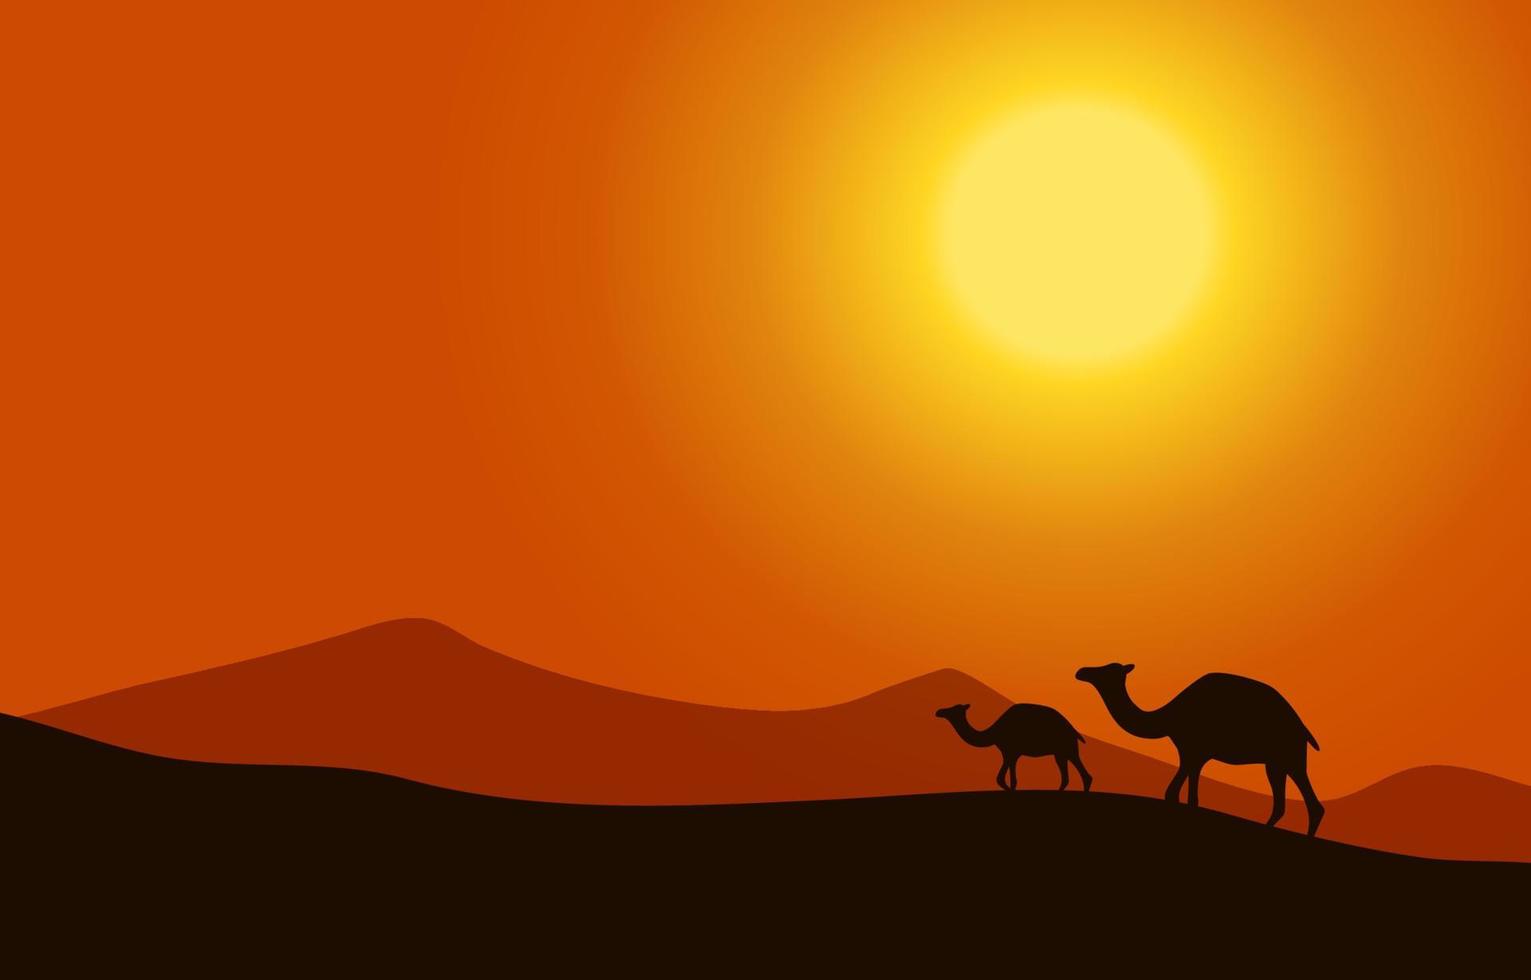 Cartoon desert landscape with hills, camels and mountains silhouettes, nature vector flat background